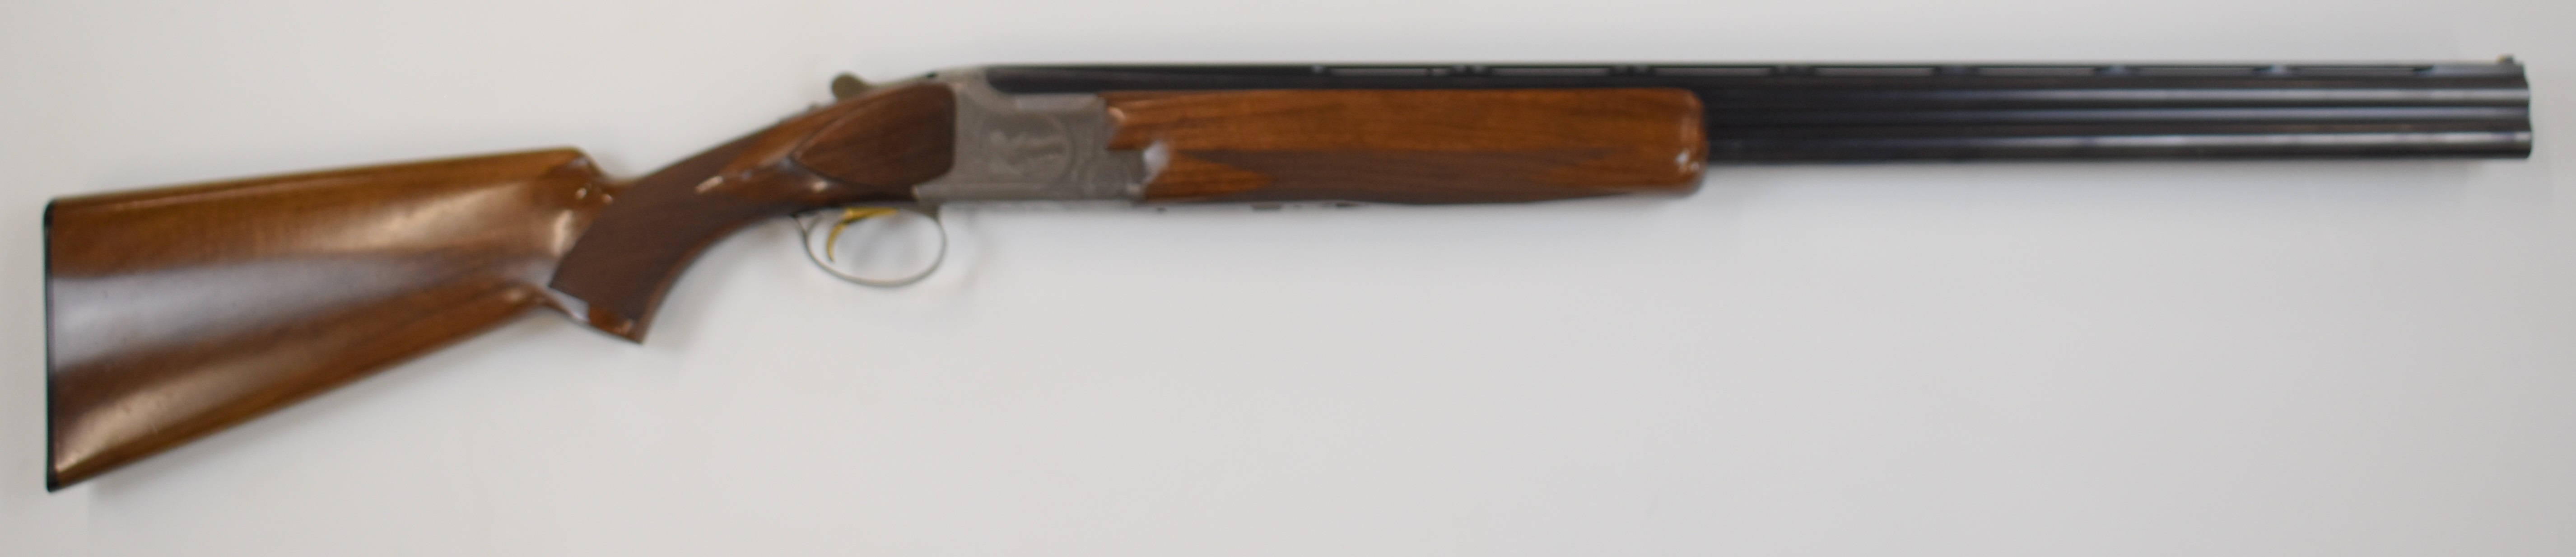 Browning B2 12 bore over and under shotgun with engraved scenes of birds to the locks and underside, - Image 2 of 12